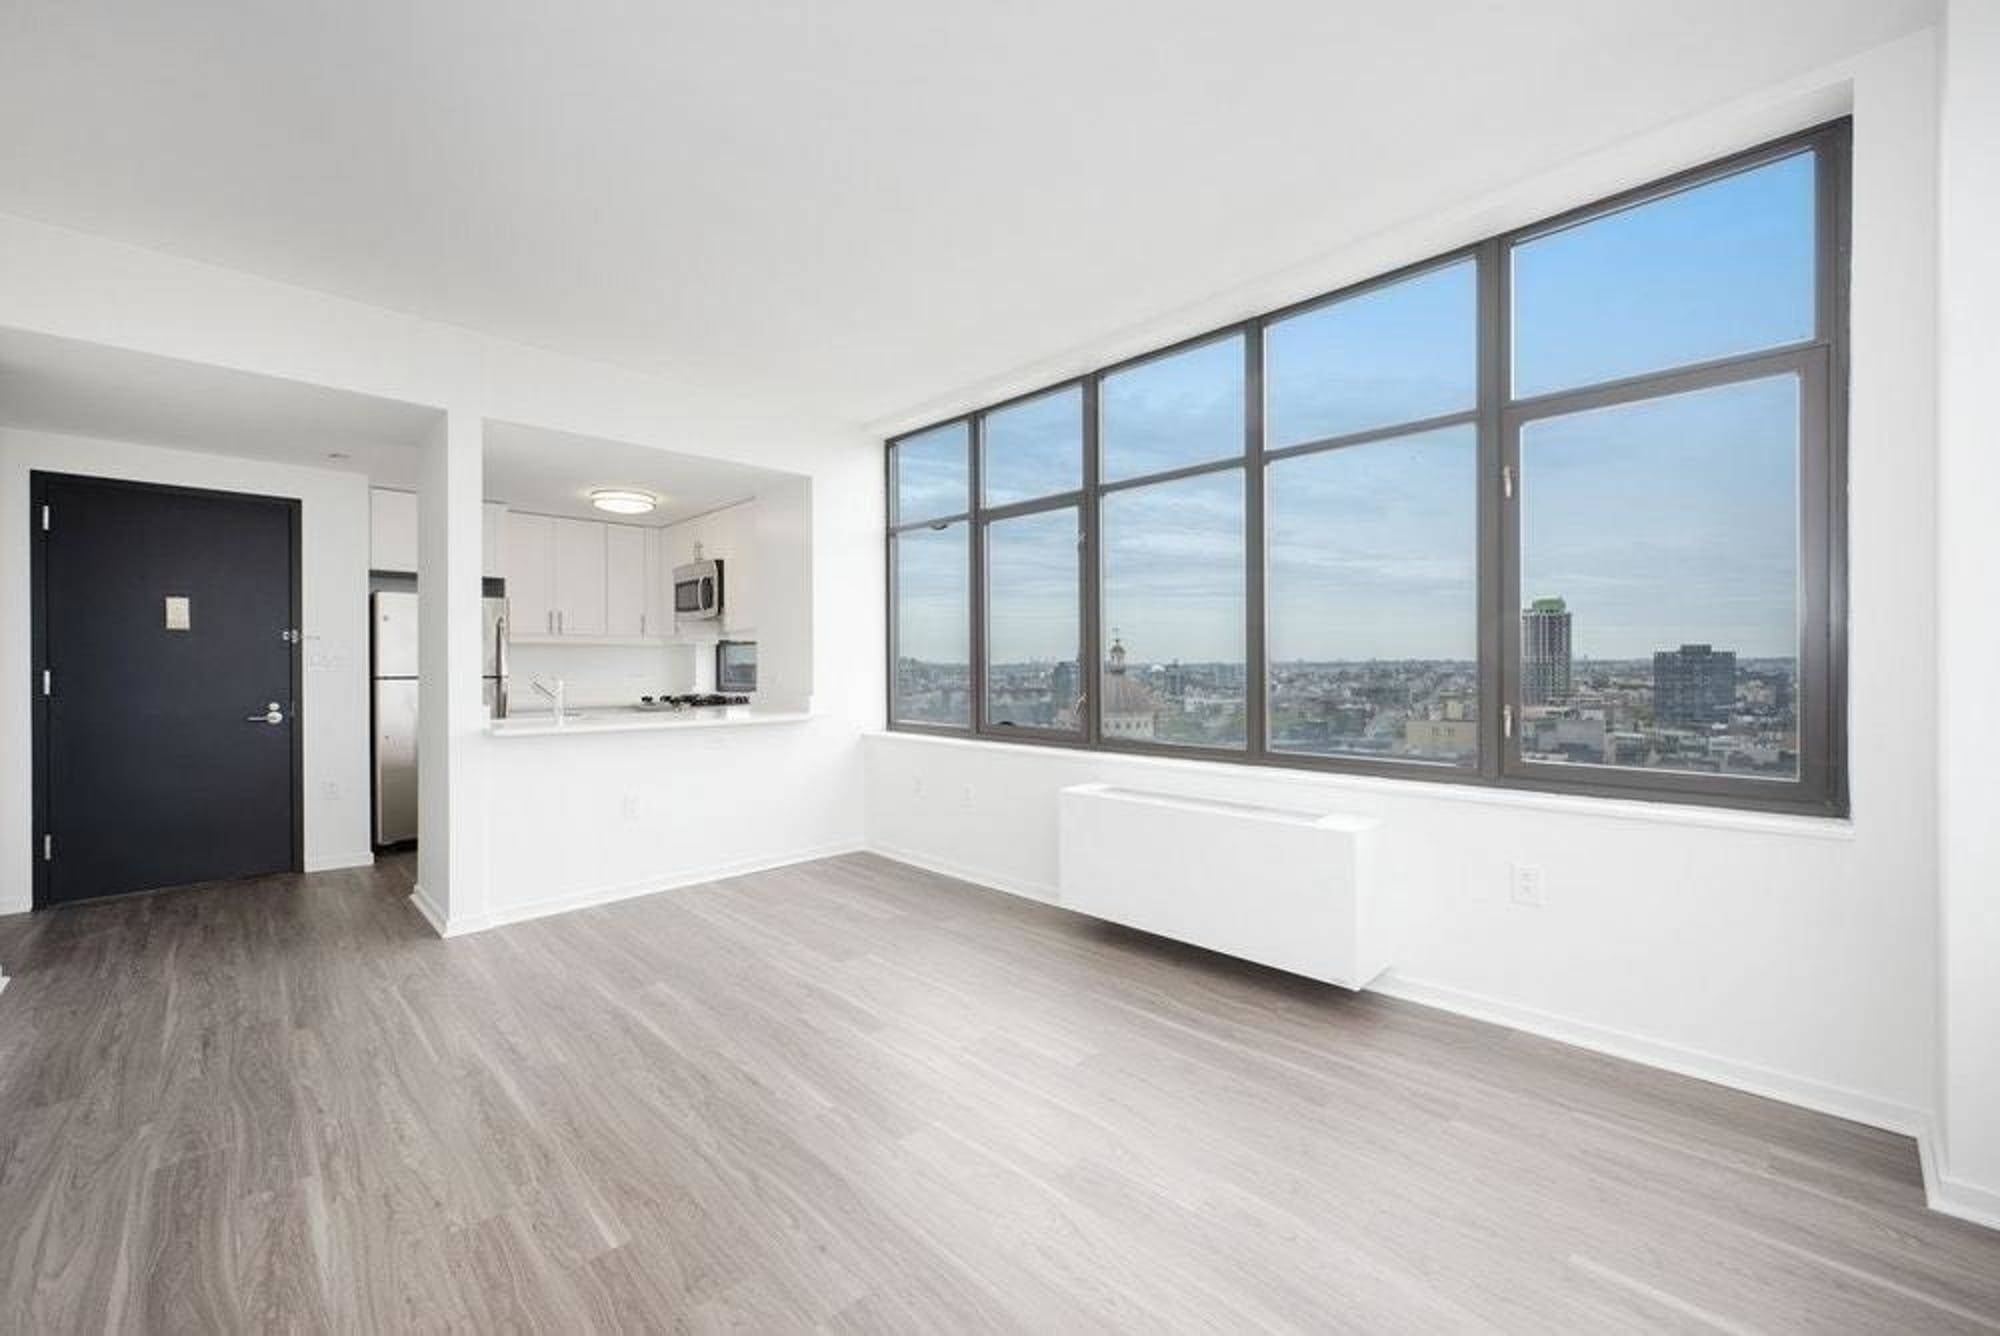 Renovated XL One Bedroom with Washer Dryer in Unit and Incredible South Facing Natural Light and Views.